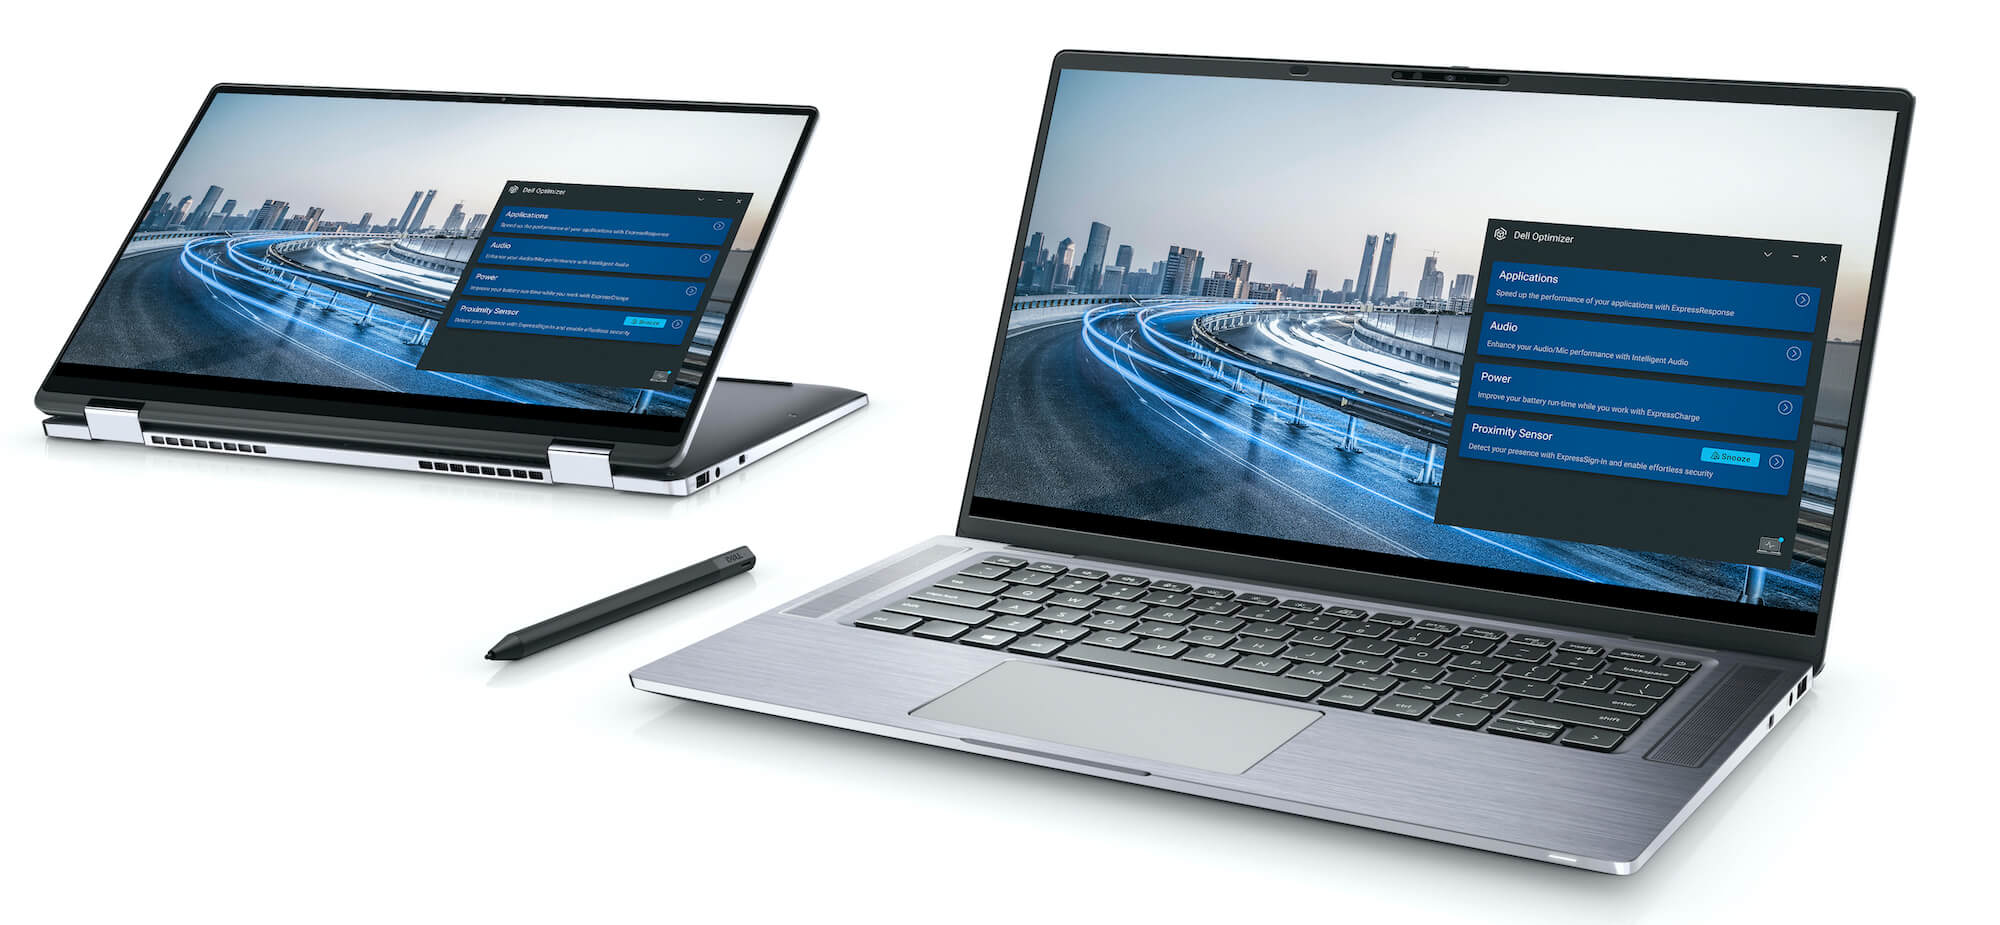 Dell's new Latitude 9510 laptop has built-in 5G